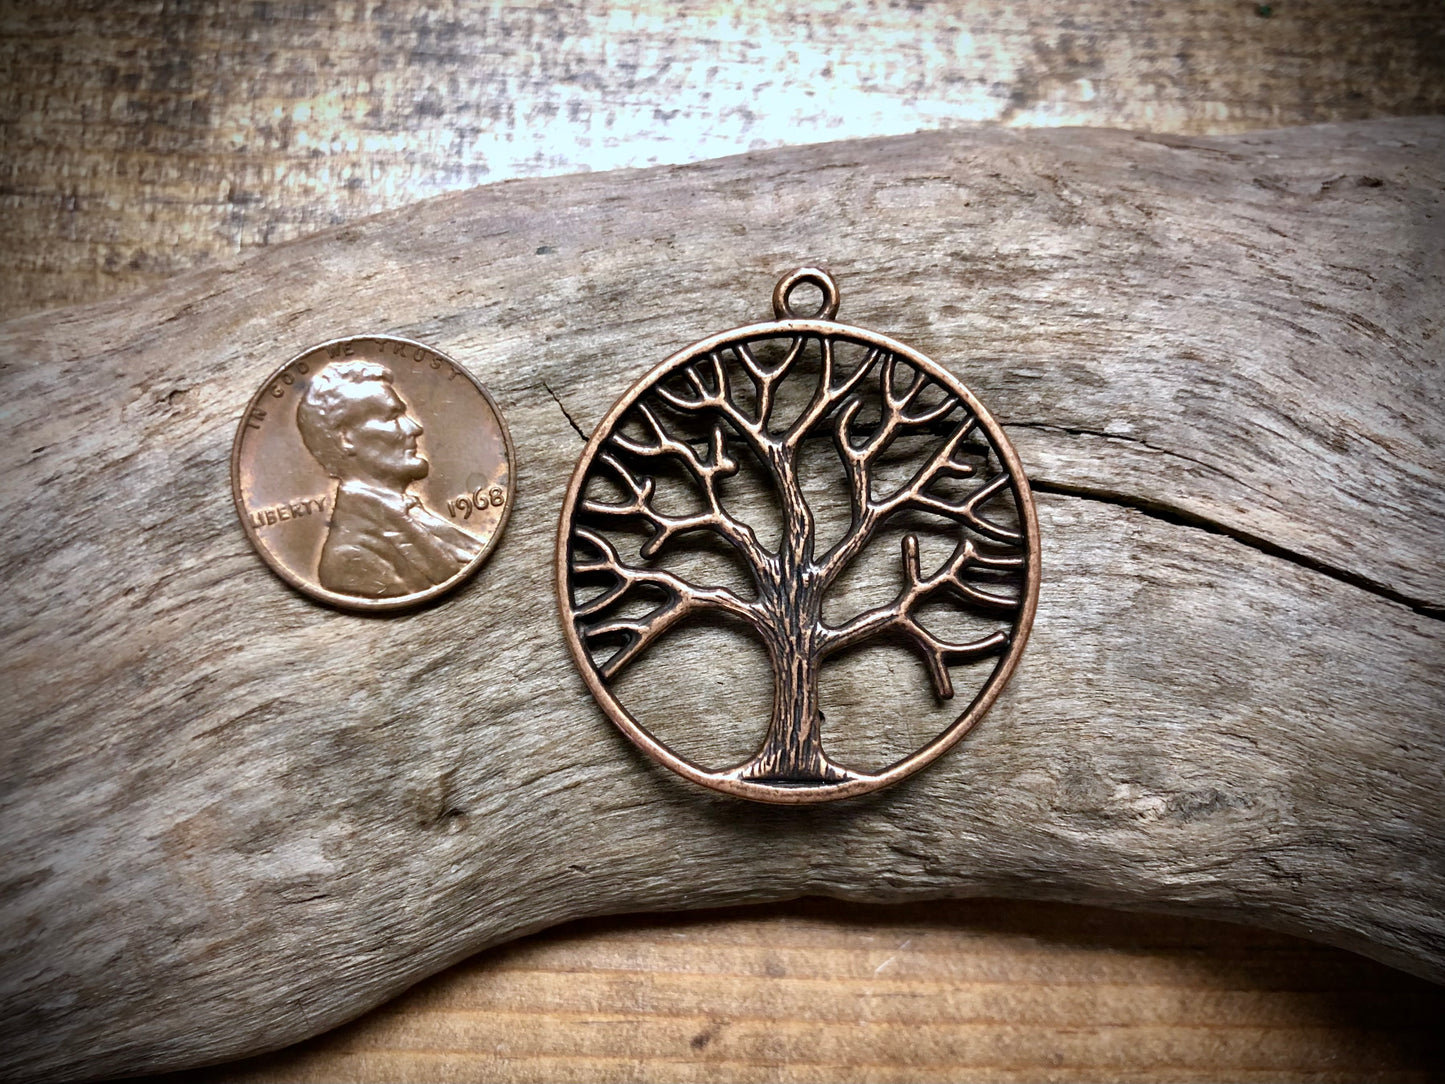 Tree of Life Copper Charm